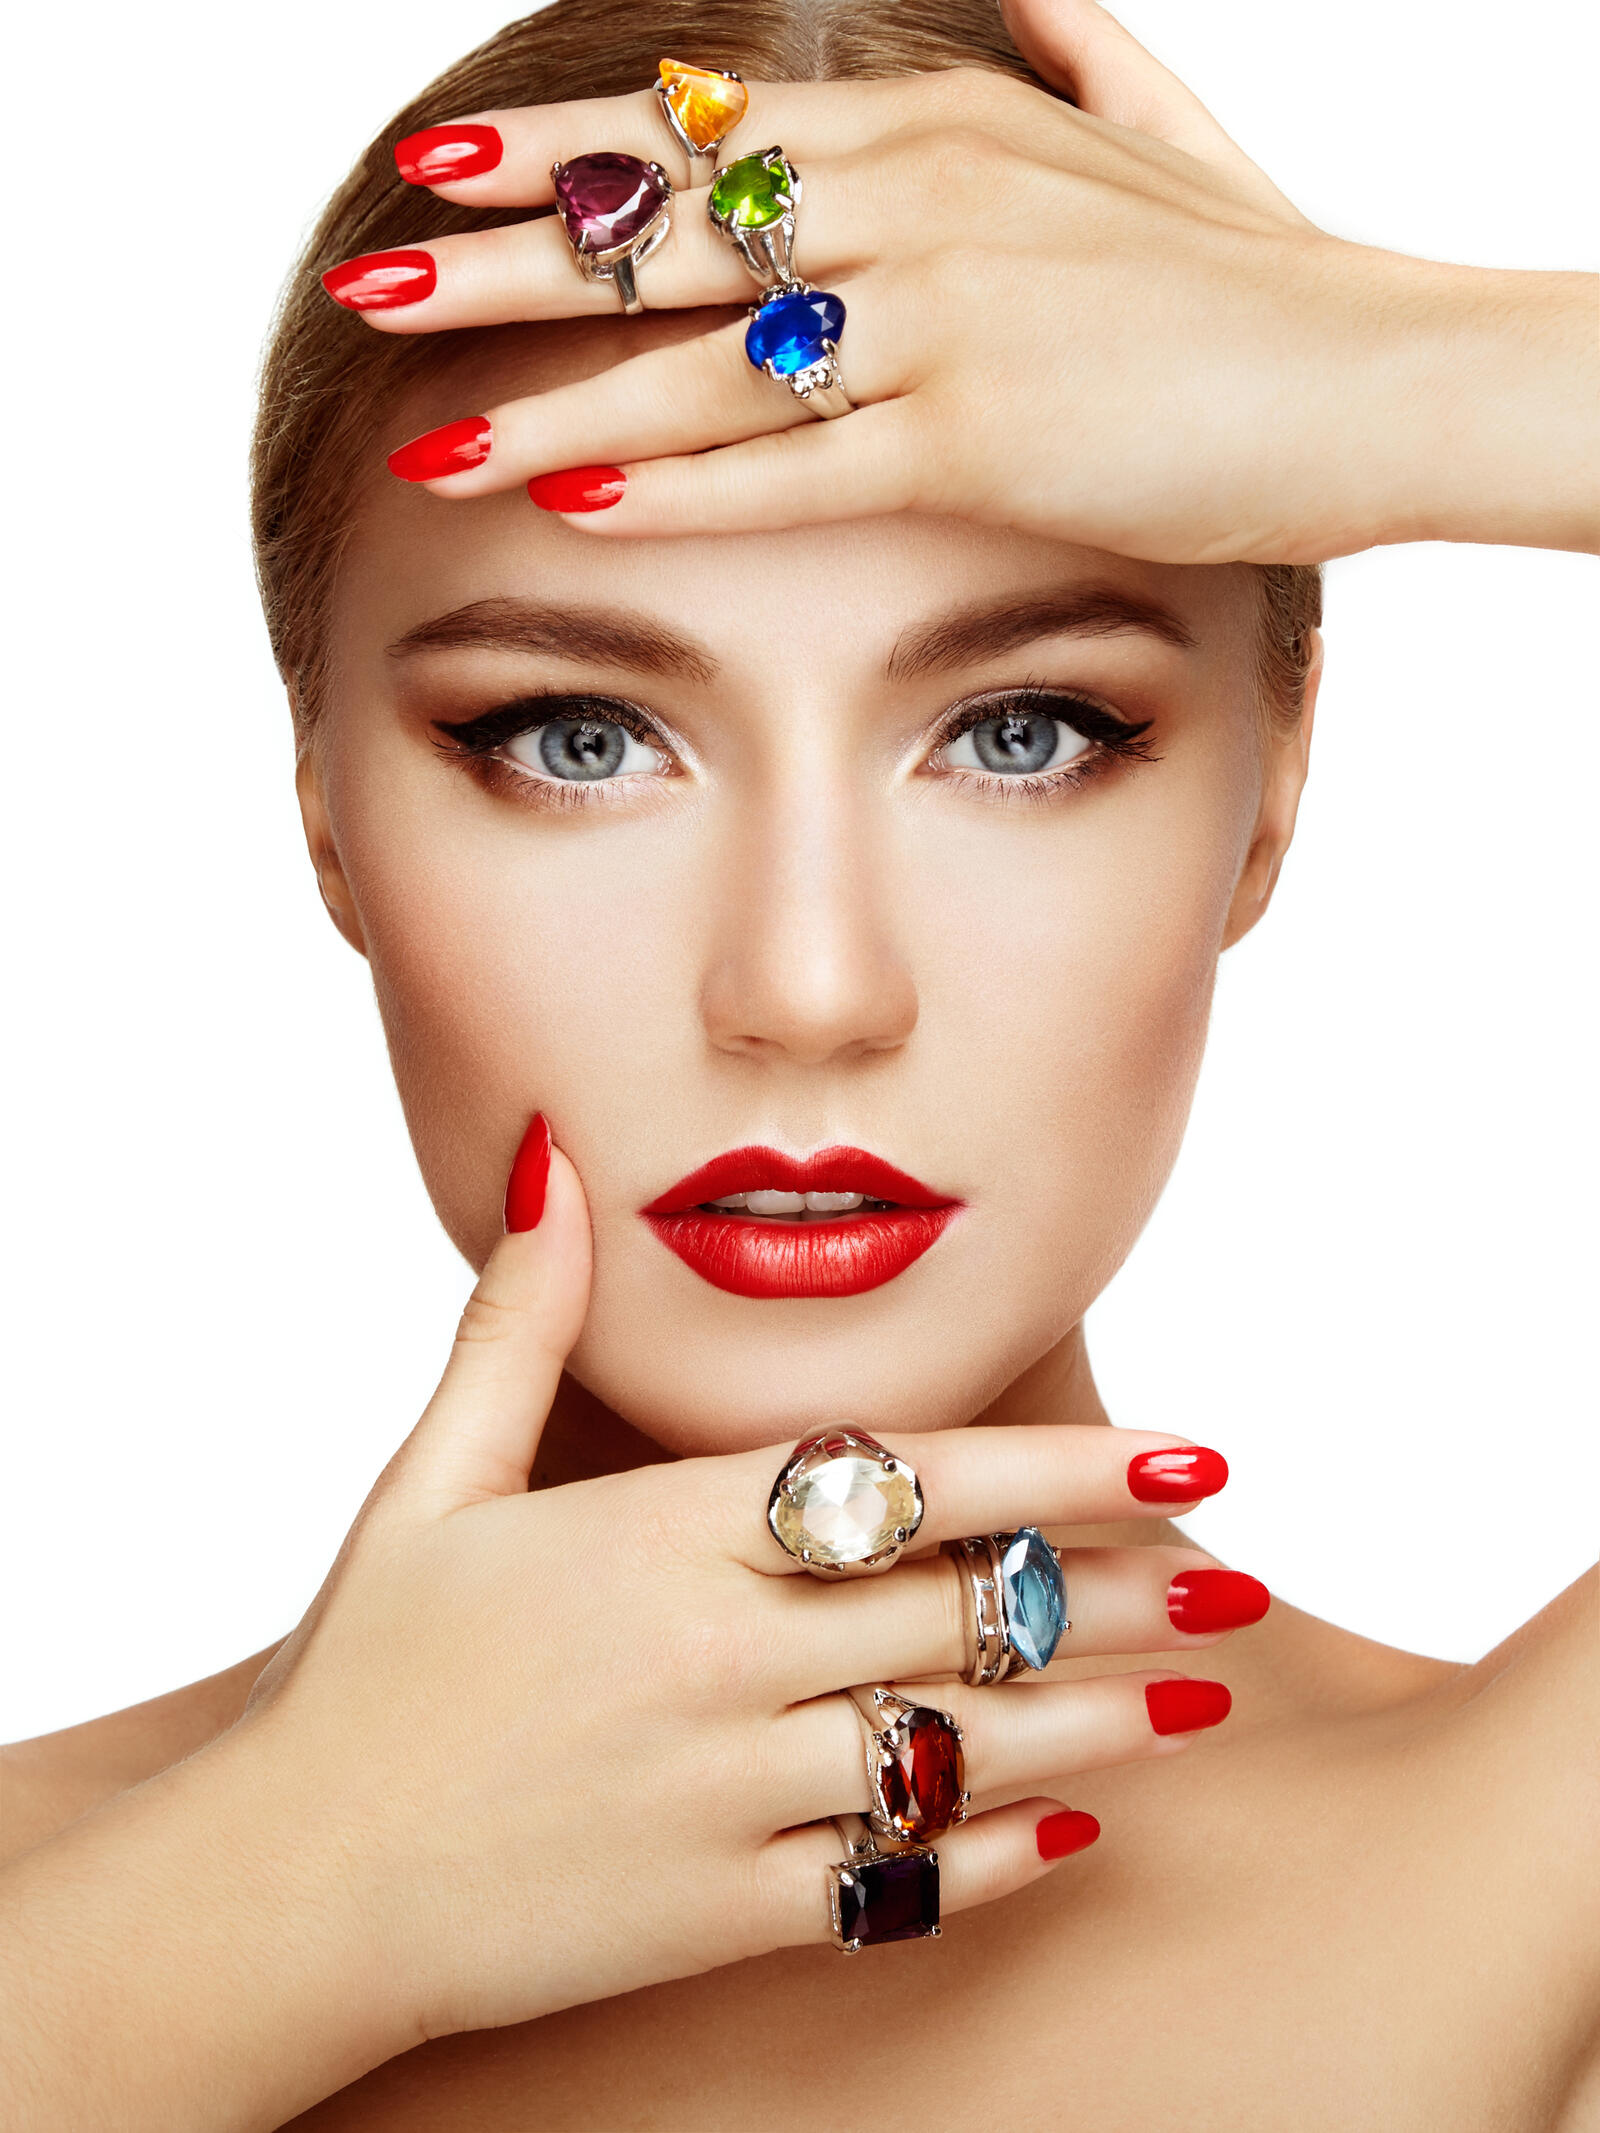 Wallpapers woman manicure make-up on the desktop